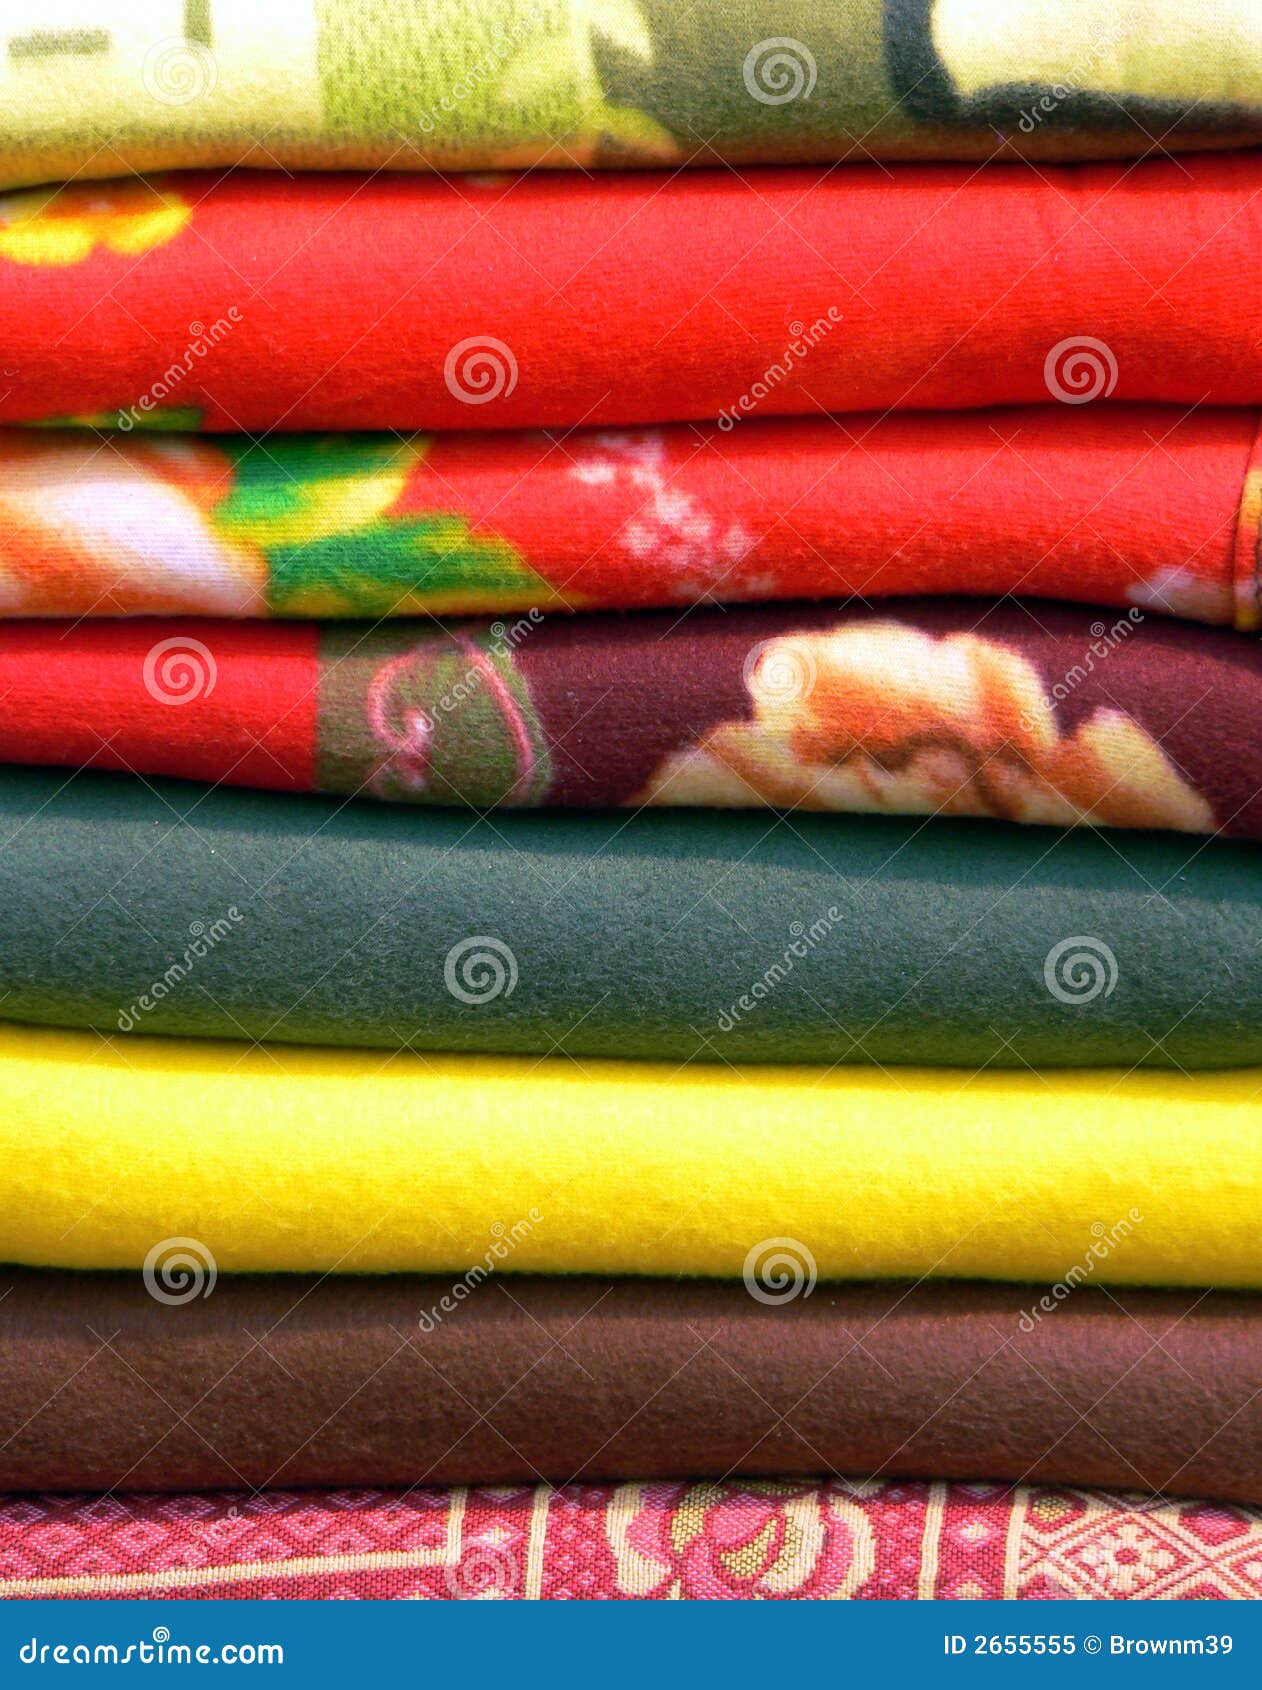 Burmese Woven Blankets stock image. Image of layers, colors - 2655555